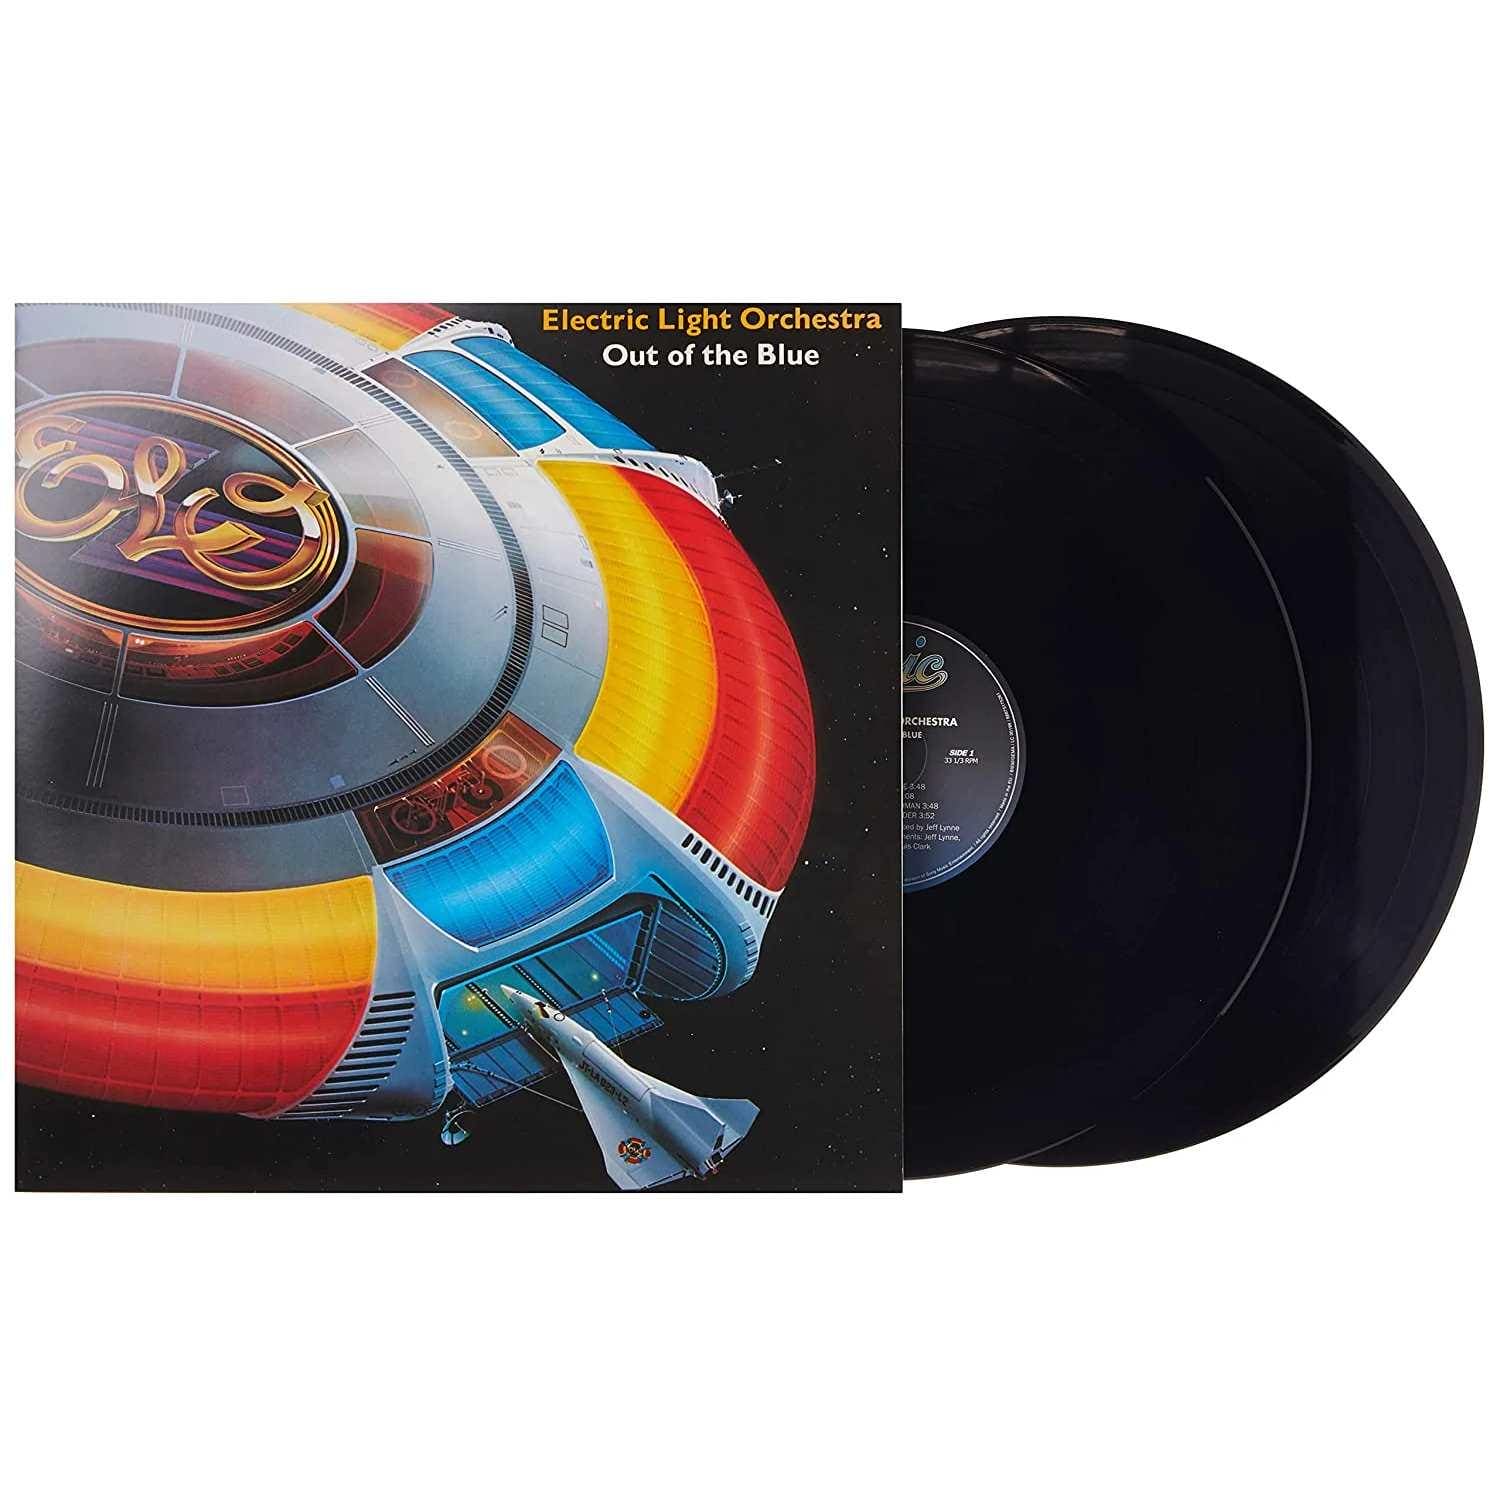 ELECTRIC LIGHT ORCHESTRA - Out of the Blue Vinyl - JWrayRecords